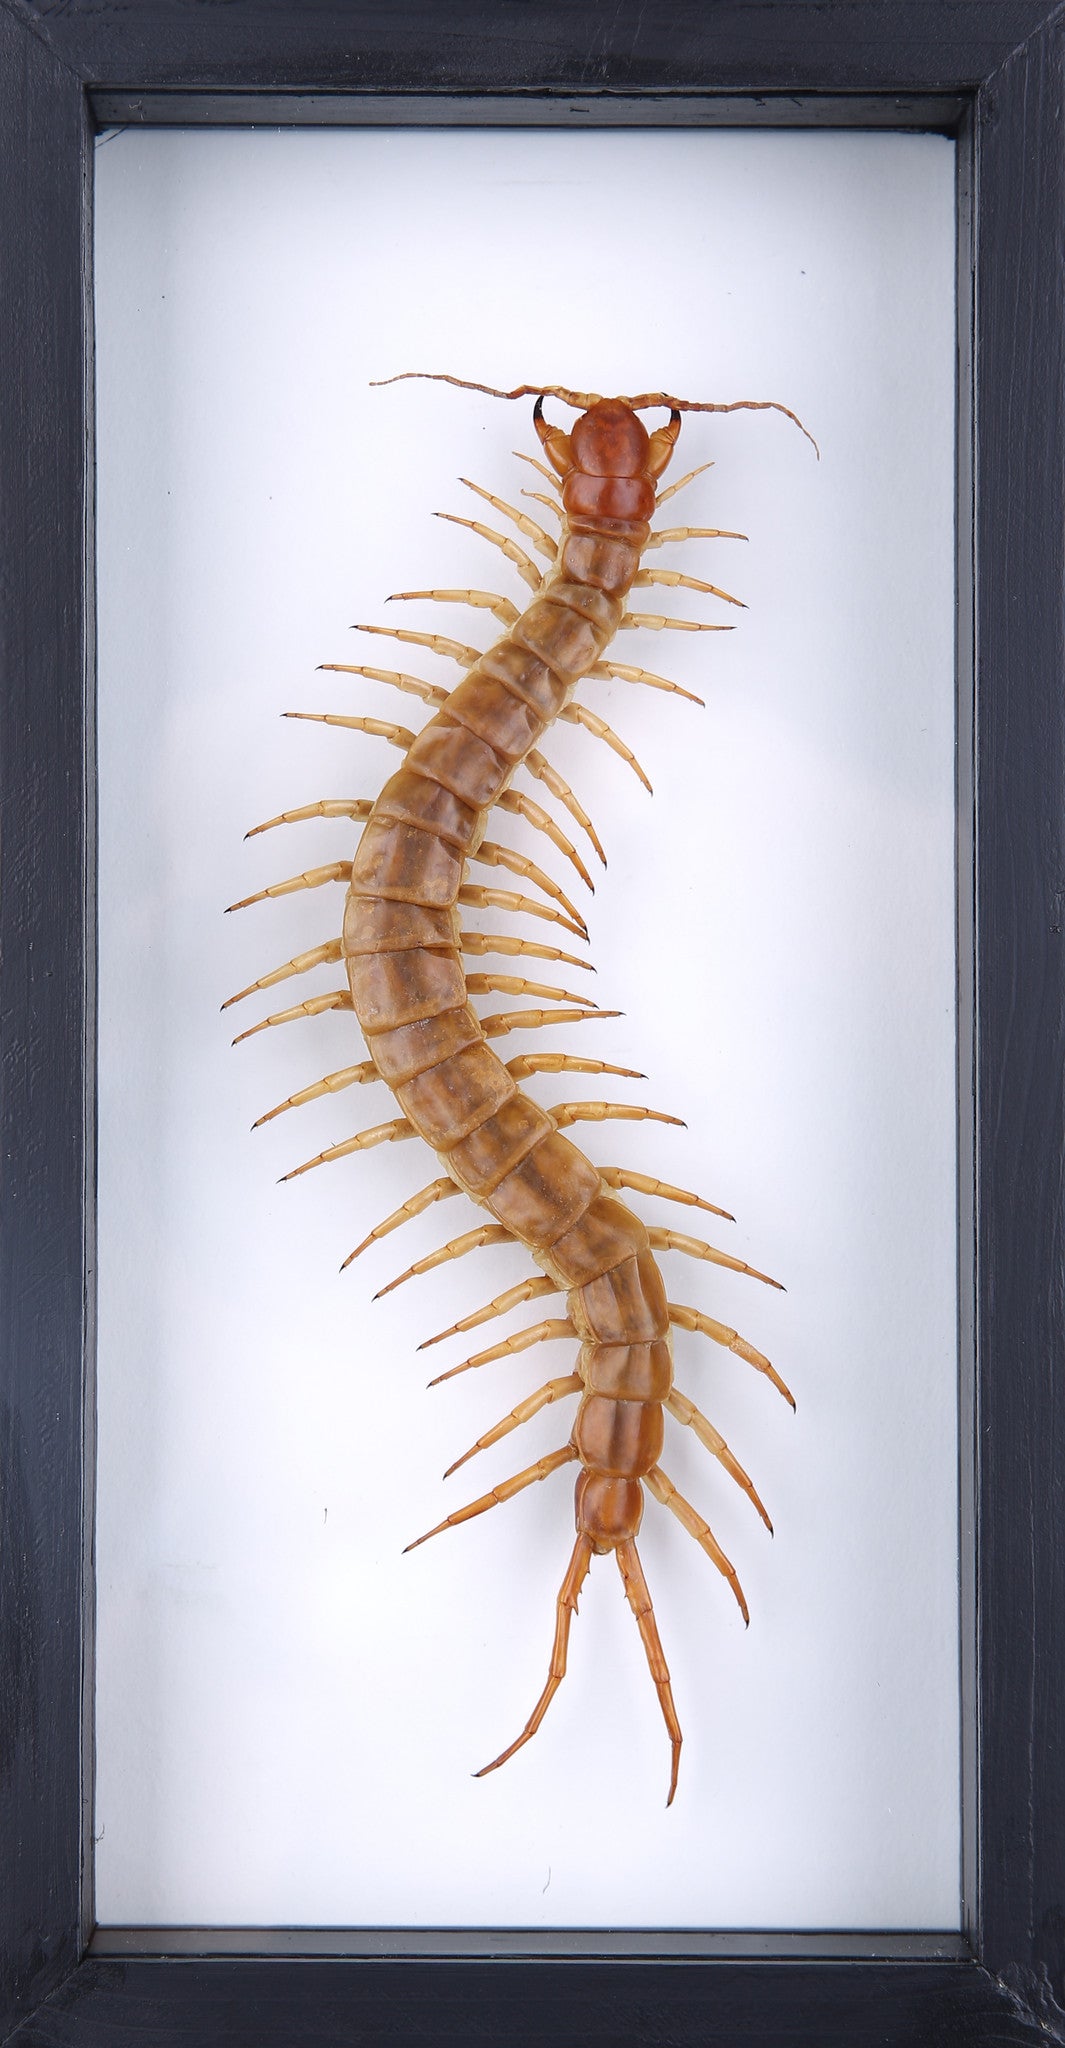 THE GIANT CENTIPEDE (SCOLOPENDRA SP.) DOUBLE-SIDE GLASS FRAME | 10.5 X 5 INCH